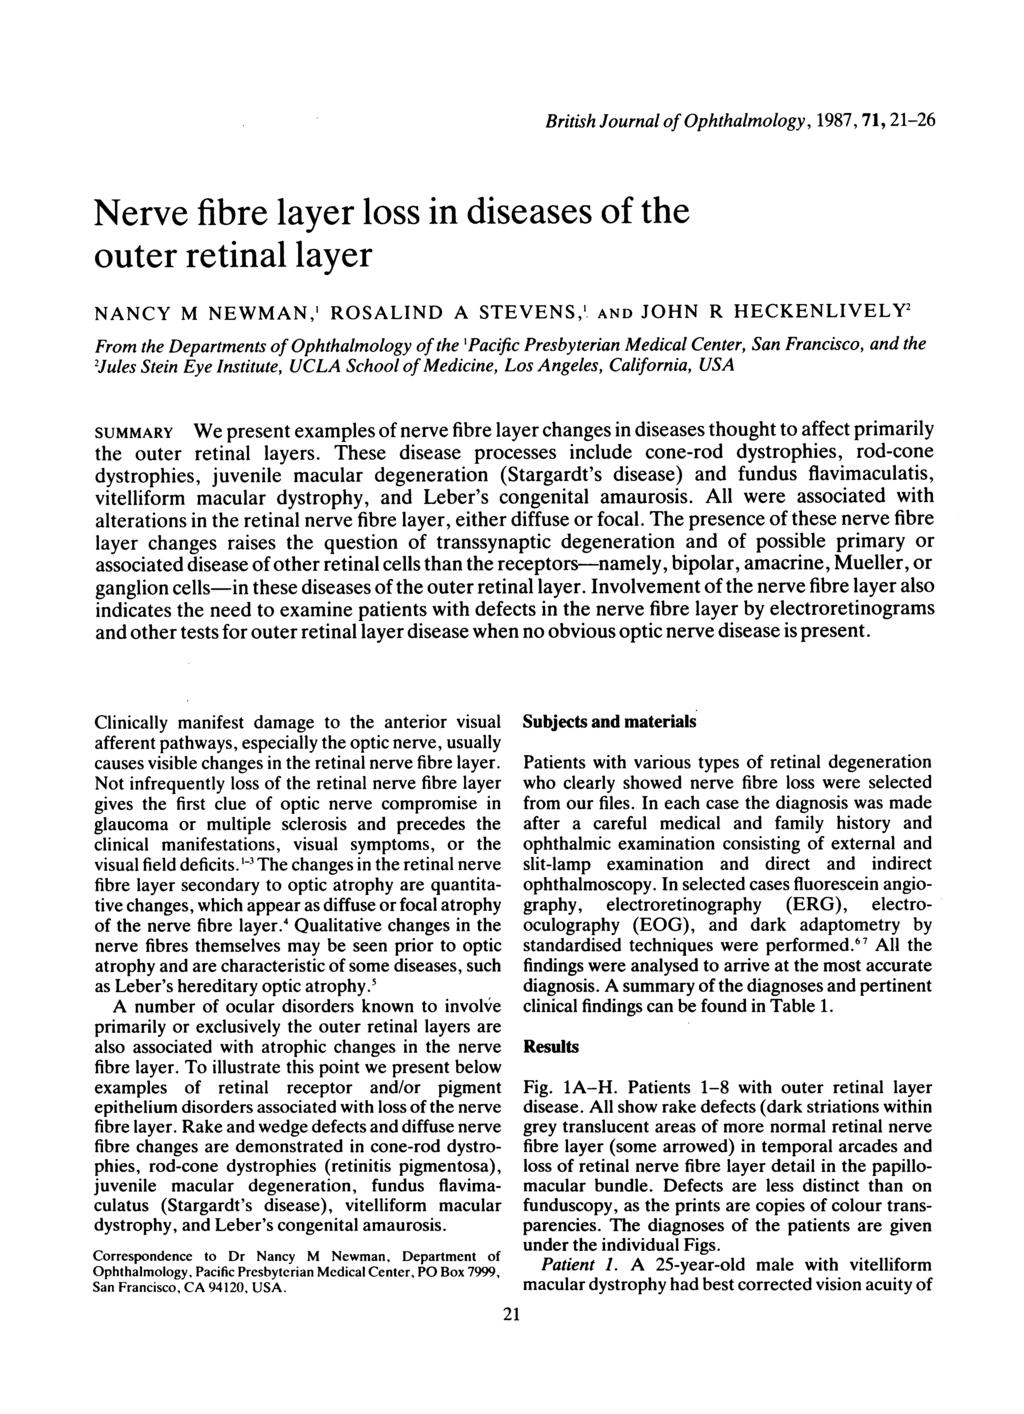 Nerve fibre layer loss in diseases of the outer retinal layer British Journal of Ophthalmology, 1987, 71, 21-26 NANCY M NEWMAN,' ROSALIND A STEVENS,' AND JOHN R HECKENLIVELY2 From the Departments of